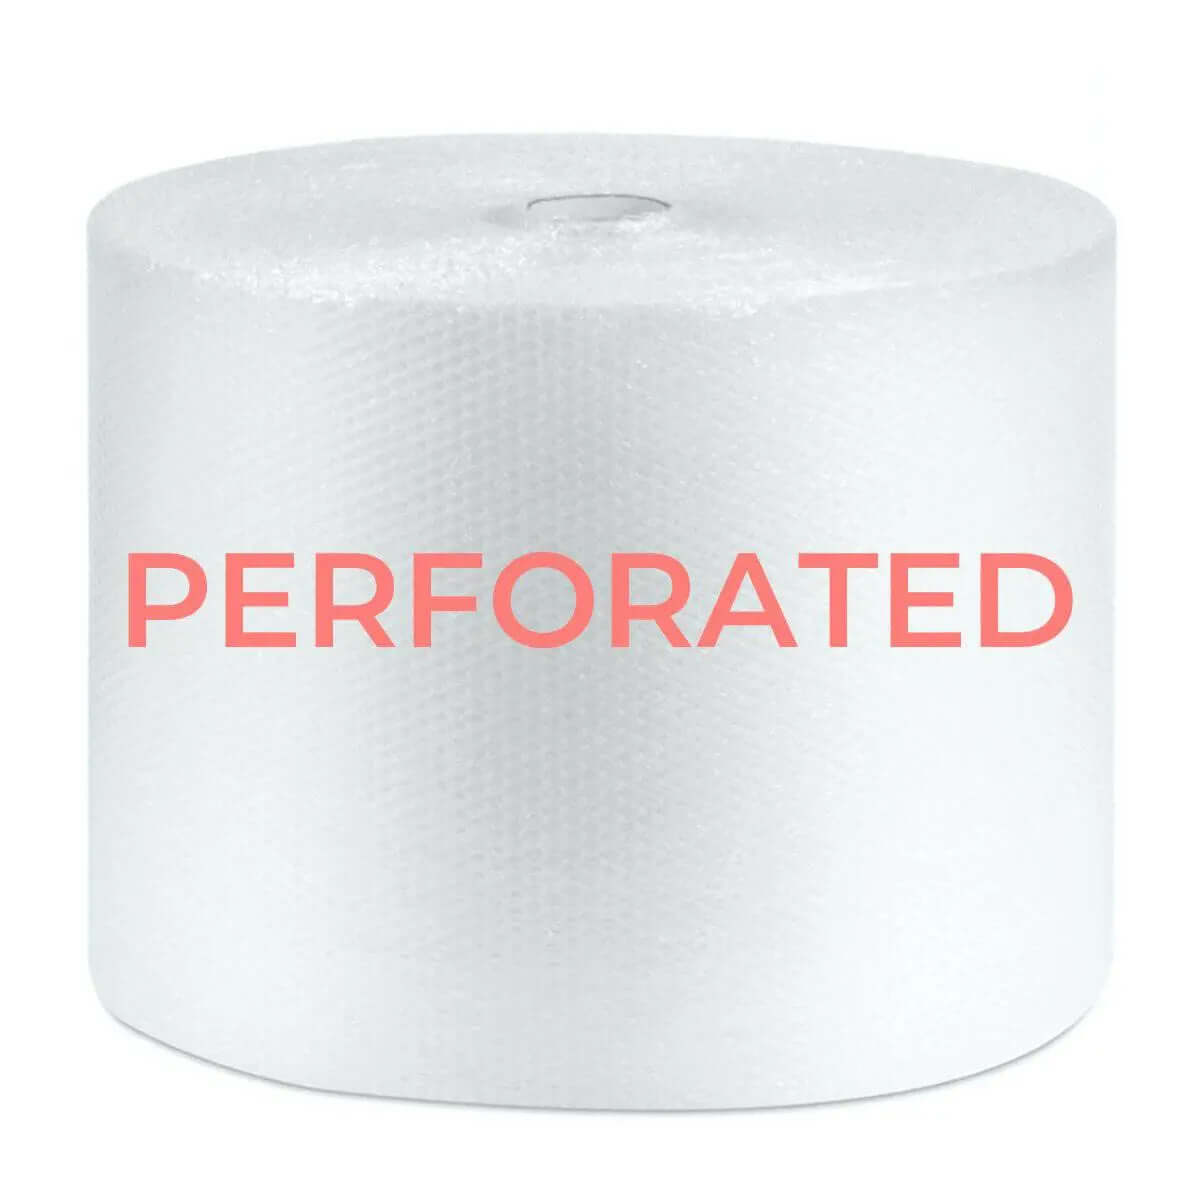 Perforated Bubble Wrap Roll - 500mm x 100m   Bubble Wrap Packstore Australia Packstore